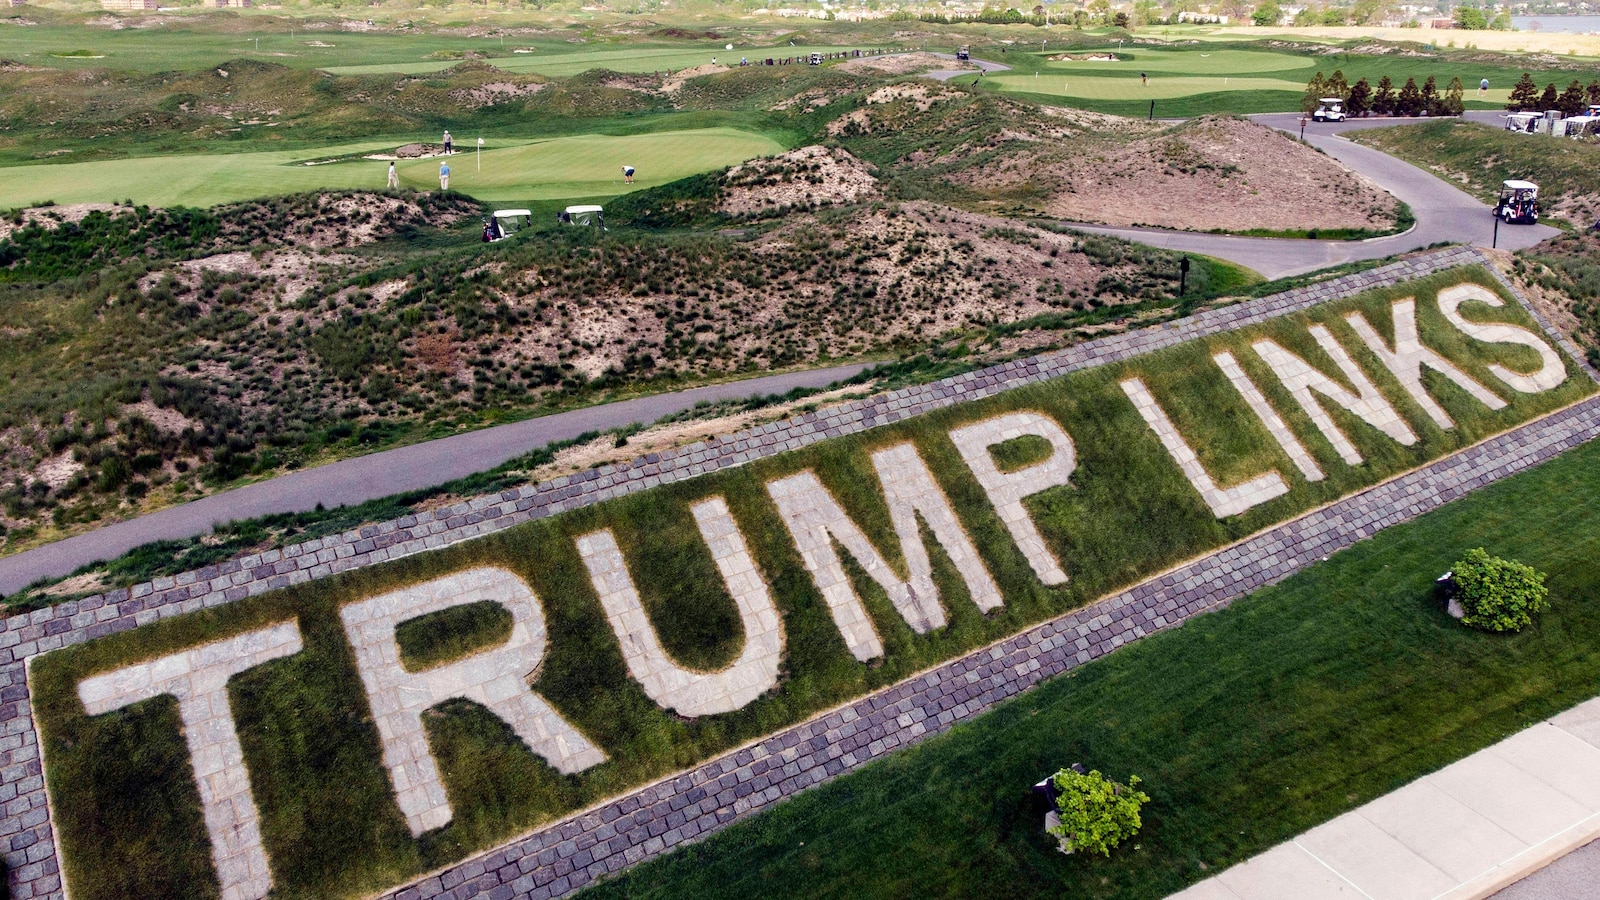 Removal of Sign with Trump's Name from Bronx Golf Course Accompanied by New Management Transition